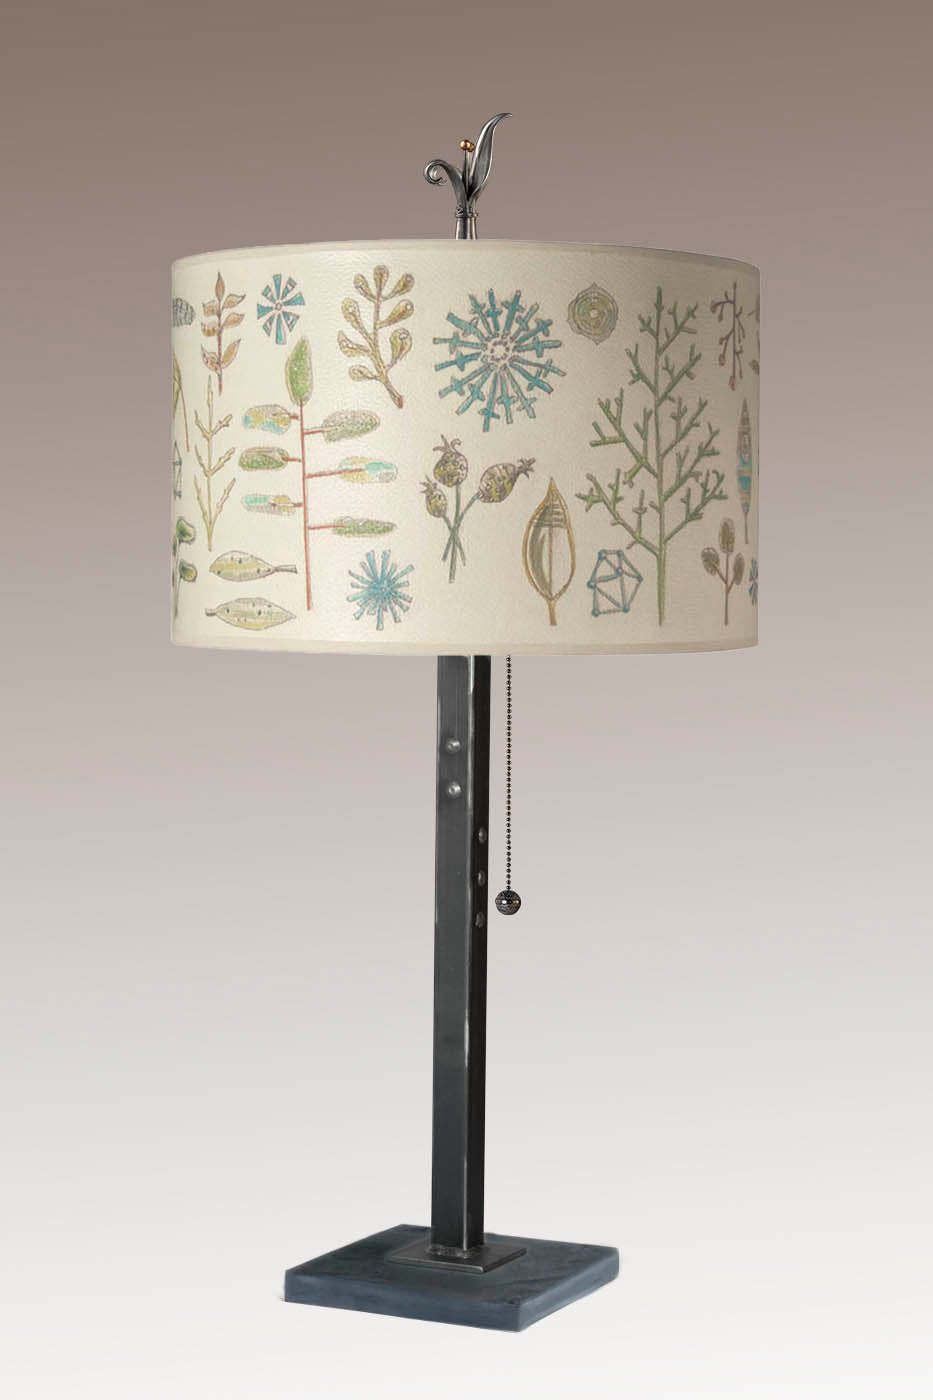 Janna Ugone & Co Table Lamp Steel Table Lamp with Large Drum Shade in Field Chart